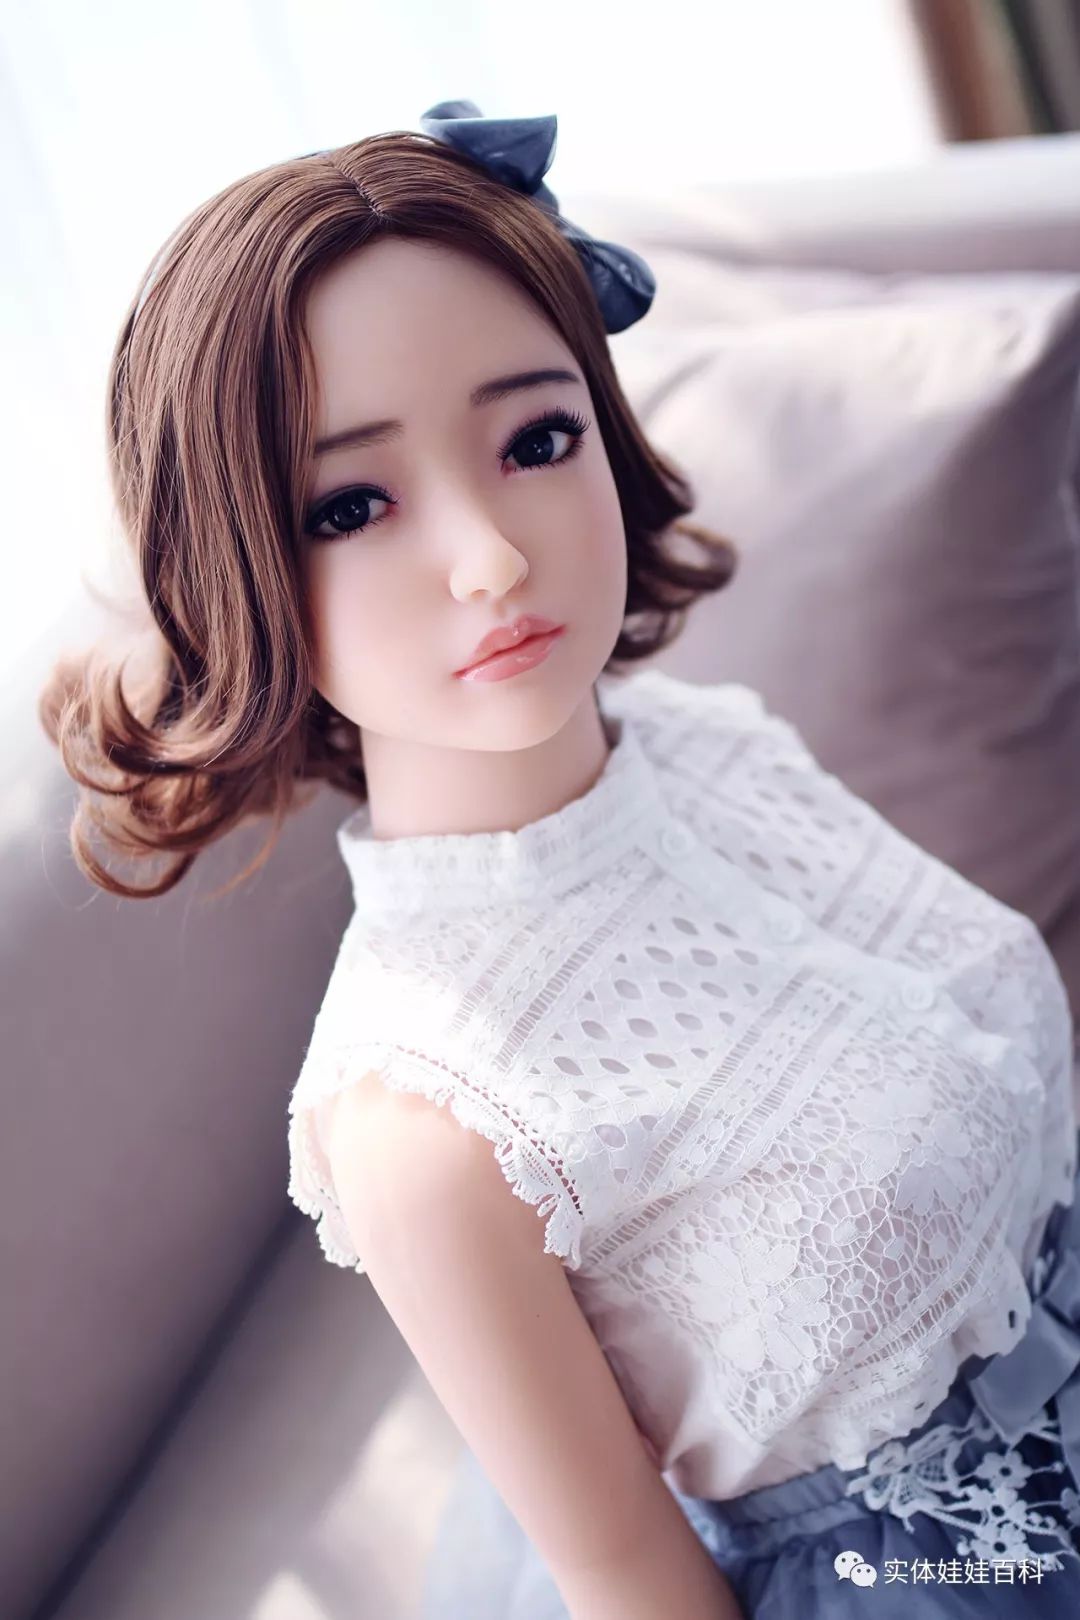 Is folding and storing physical dolls realistic?